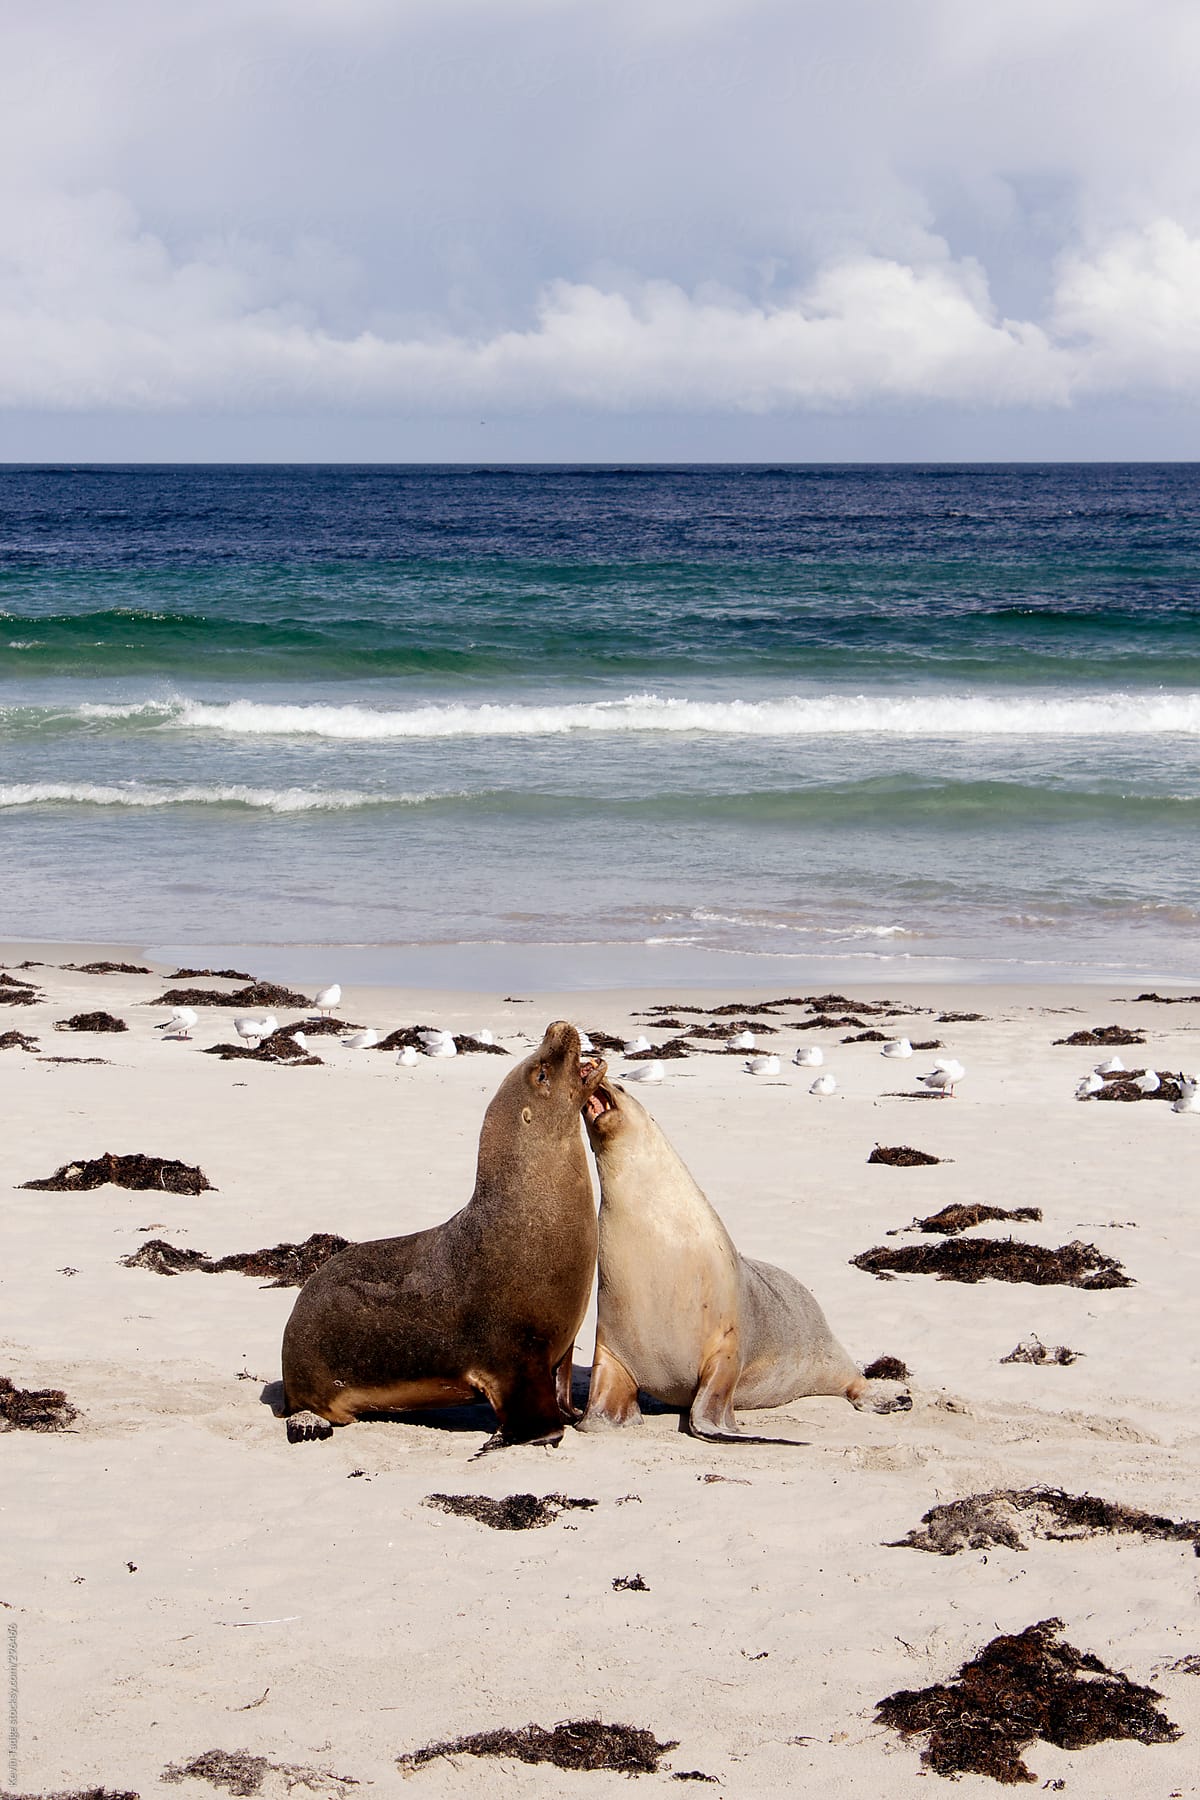 Two Sea Lions Sparring on a Beach in Australia